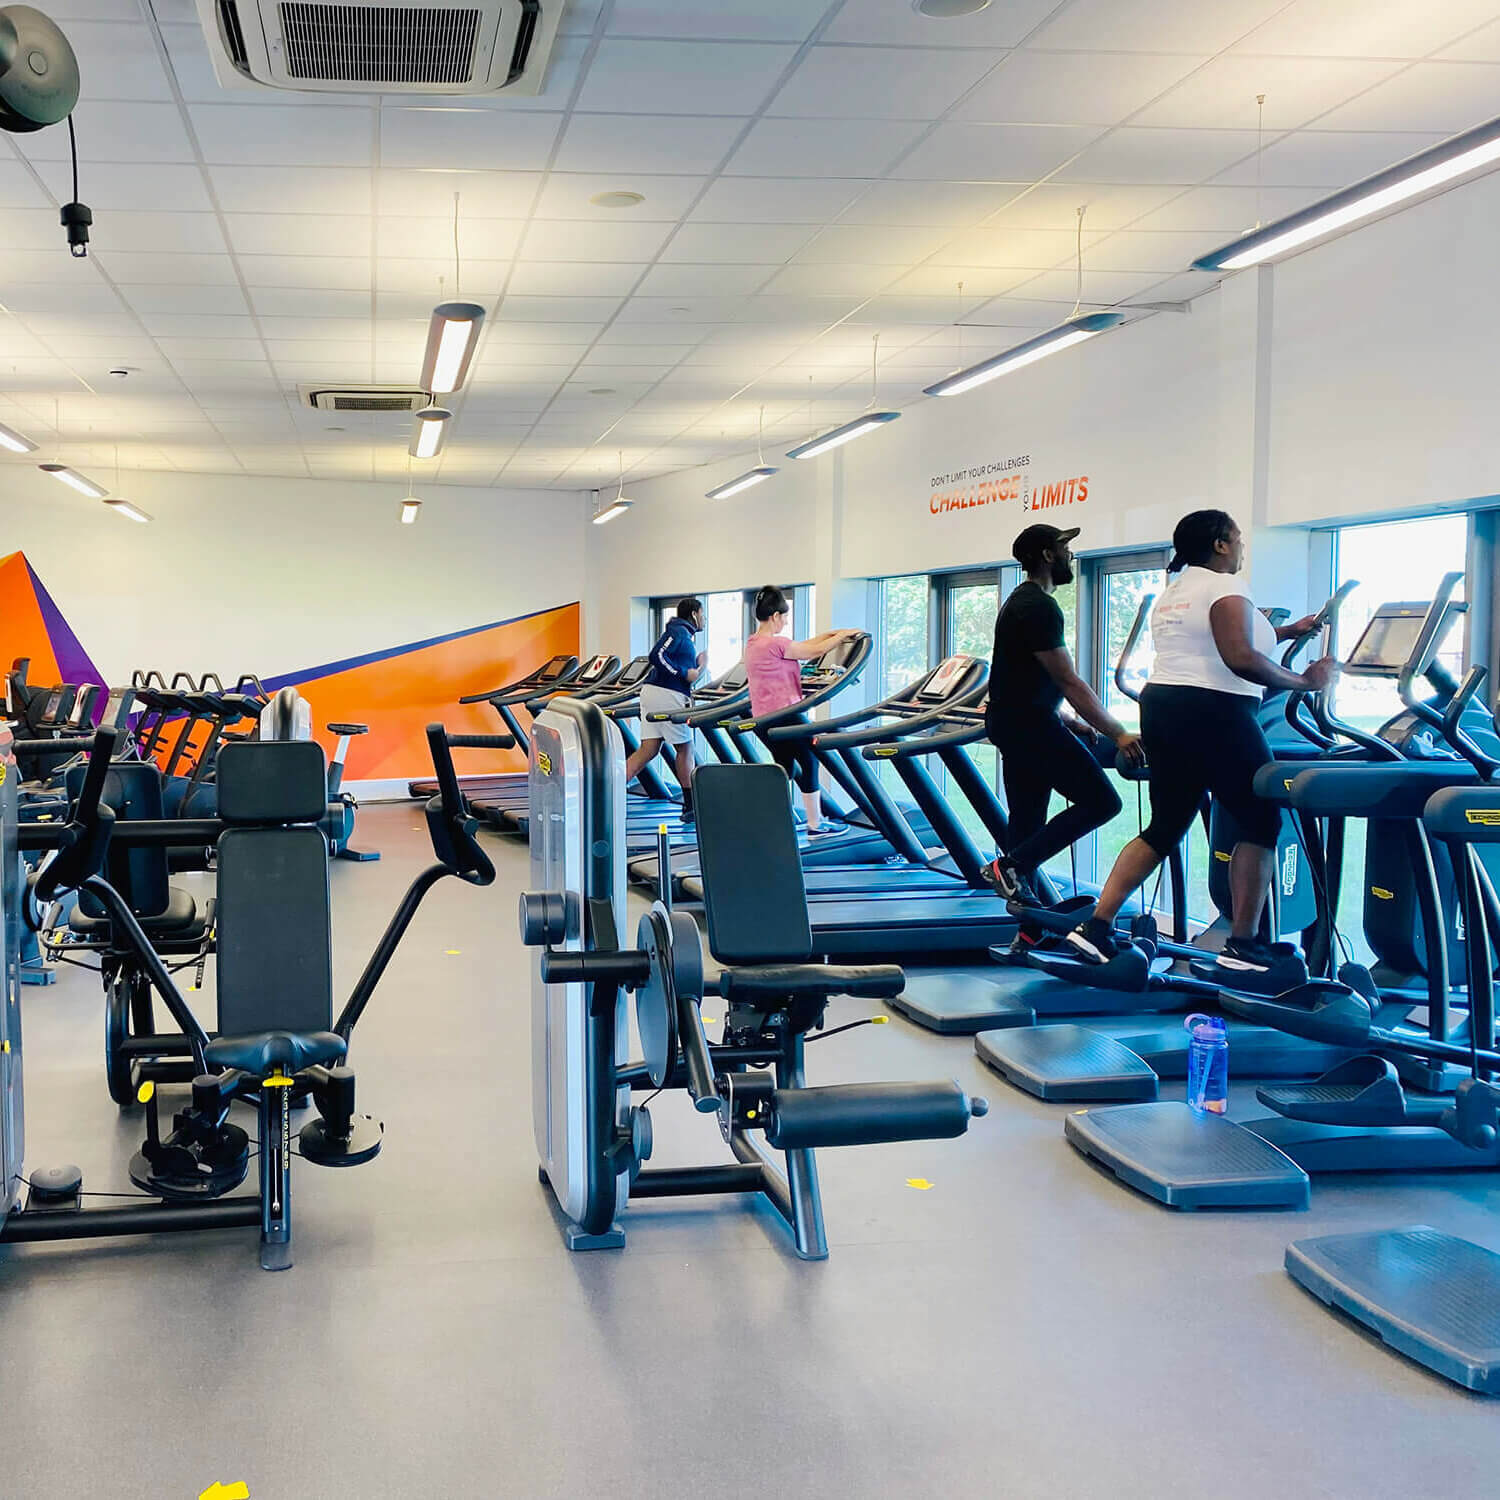 People in the gym at Moat House Leisure Centre